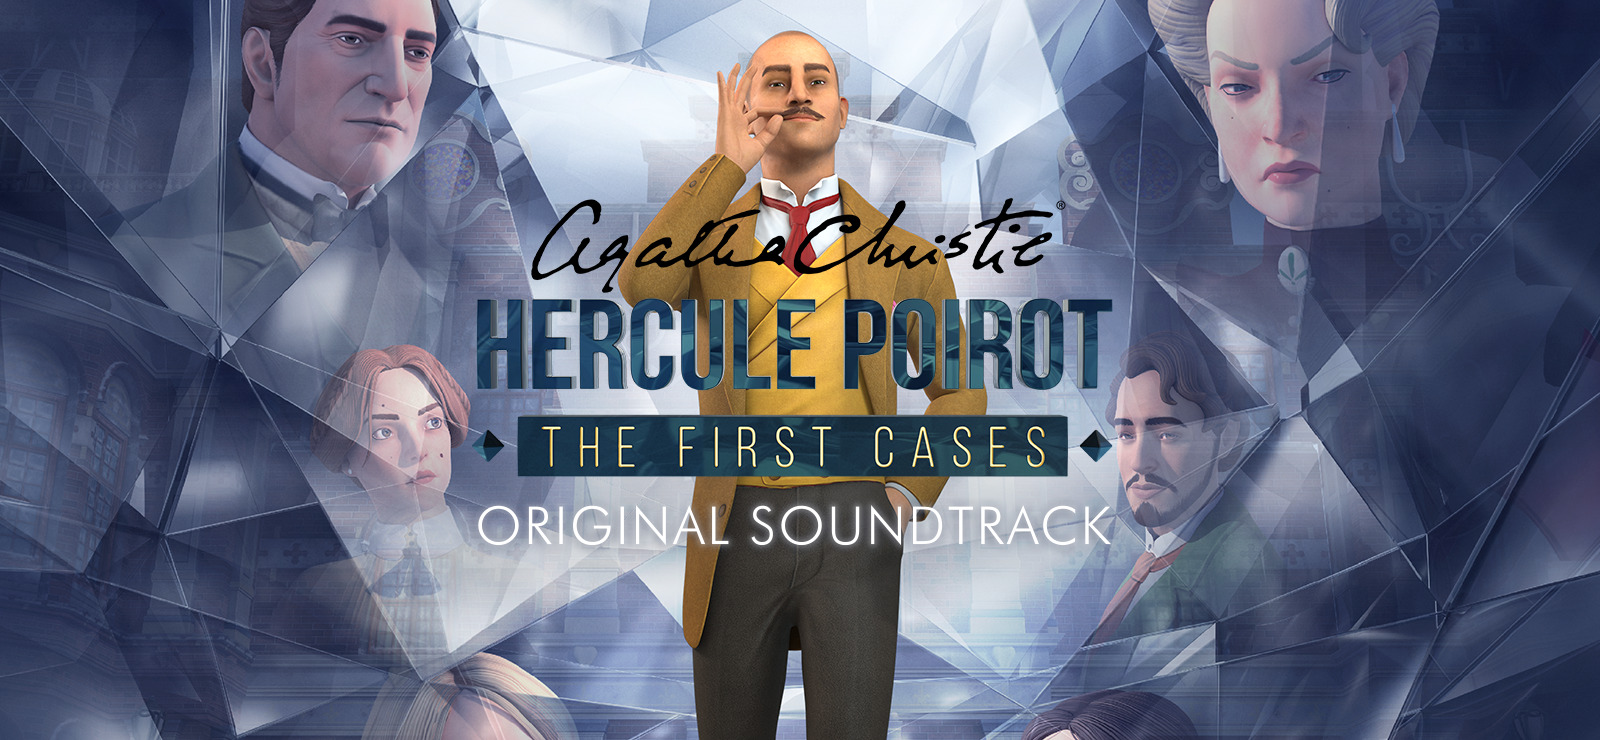 Hercule Poirot The First Cases 2021 Wallpapers